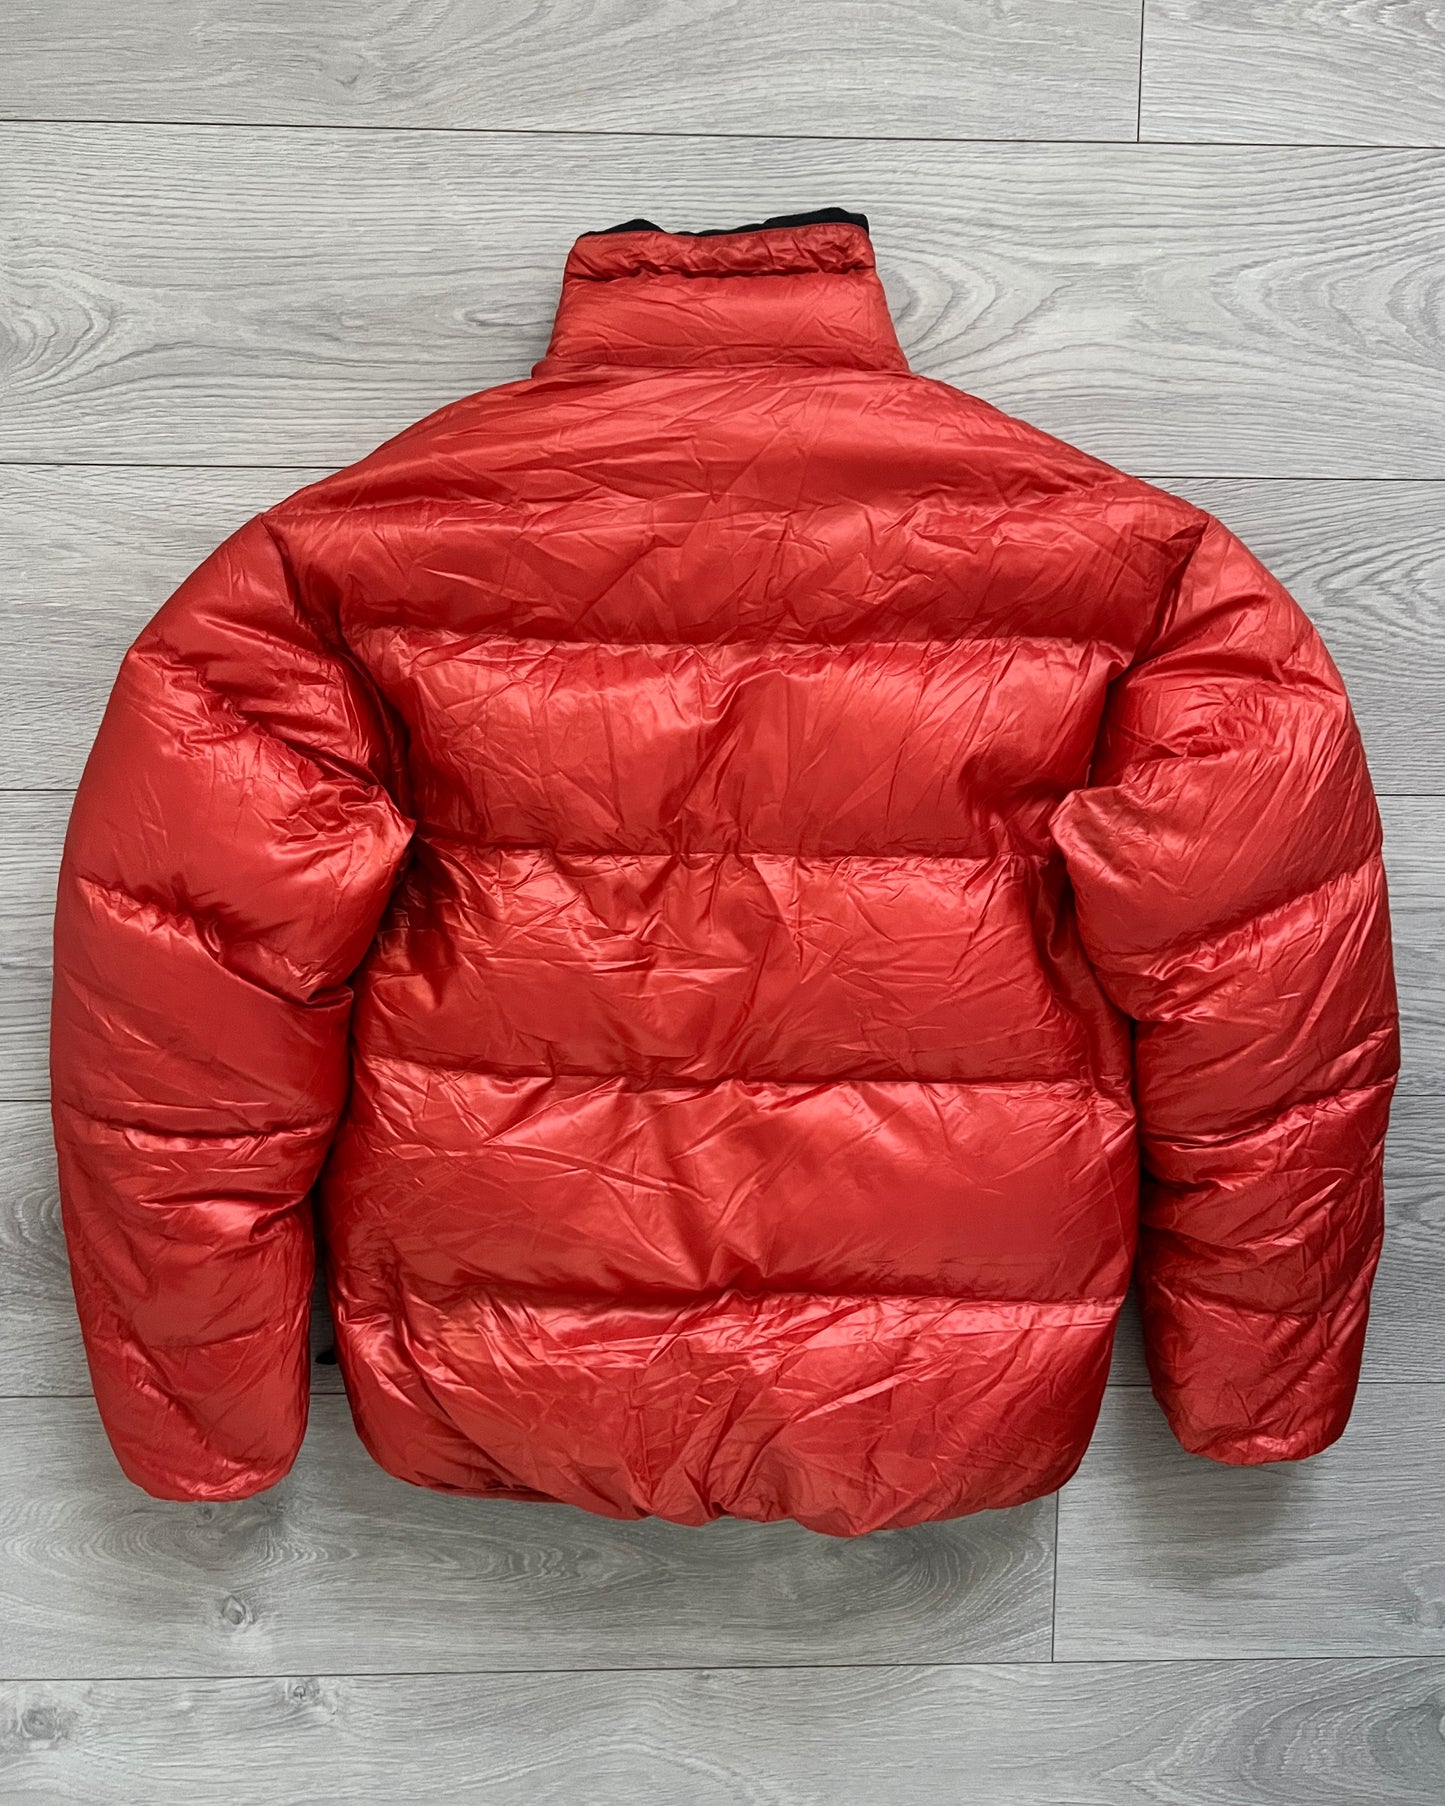 Montbell 00s Goose Down Puffer Jacket - Size S